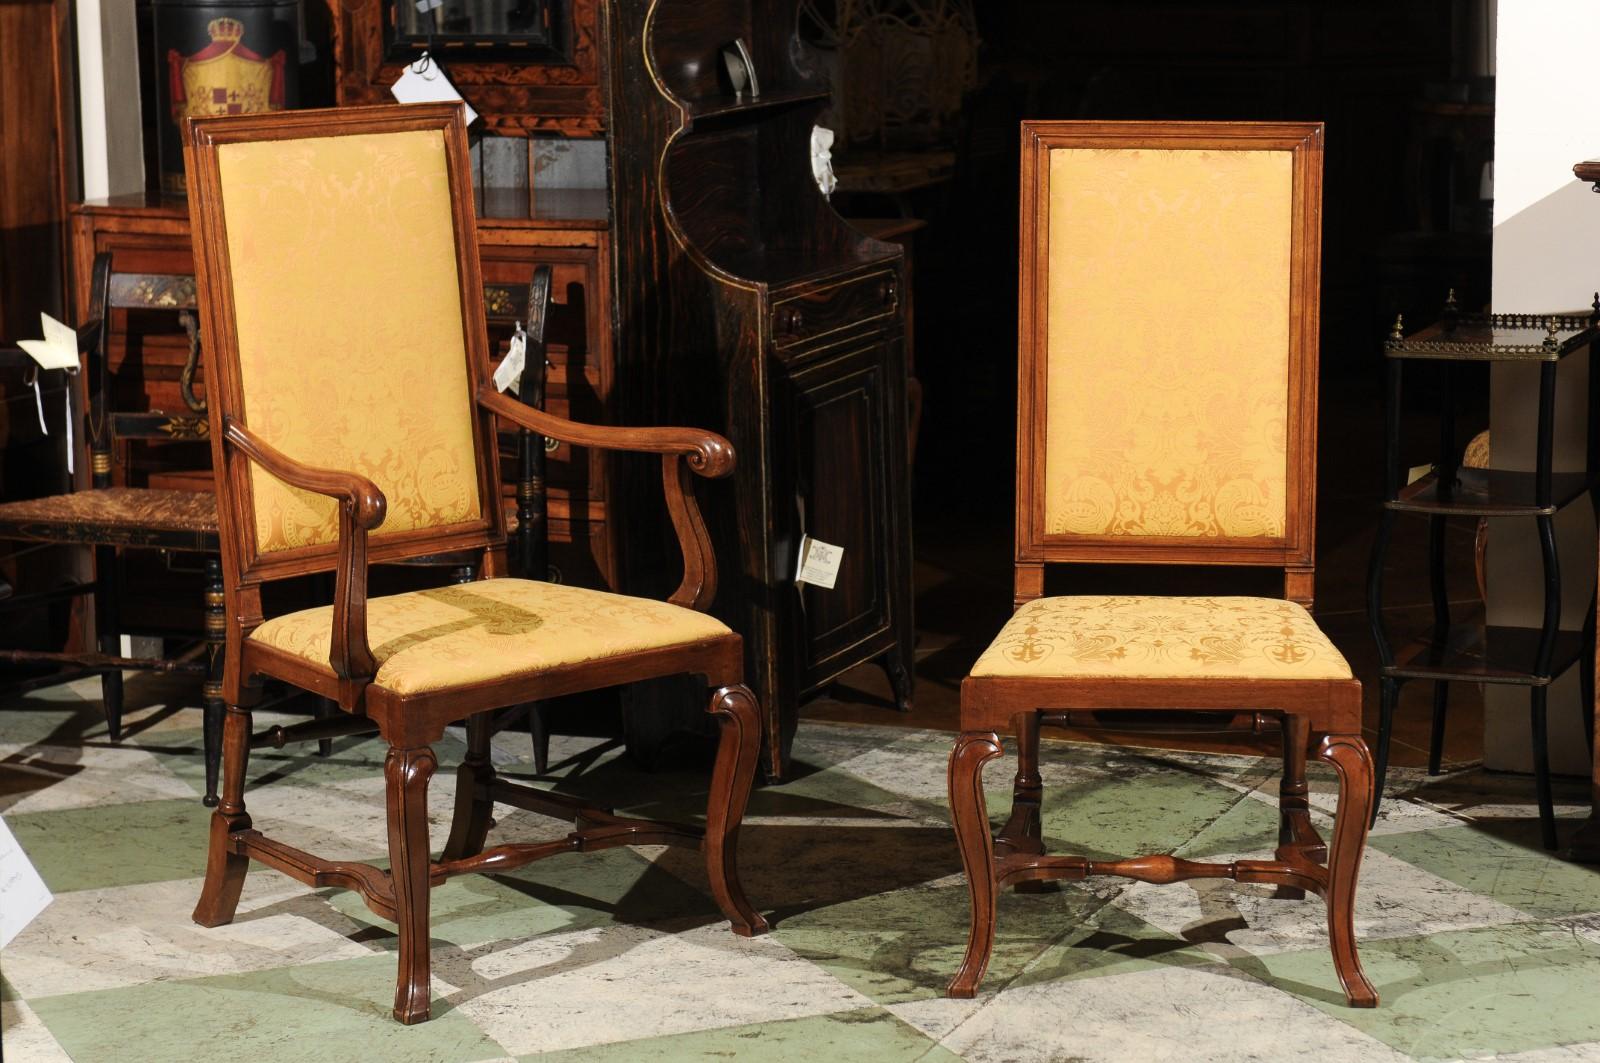 The set of 10 English Queen Anne Style walnut dining chairs with tall upholstered backs, cross stretchers and cabriole legs. 2 of the chairs are early 18th century and 8 are late mid - late 20th century. 

